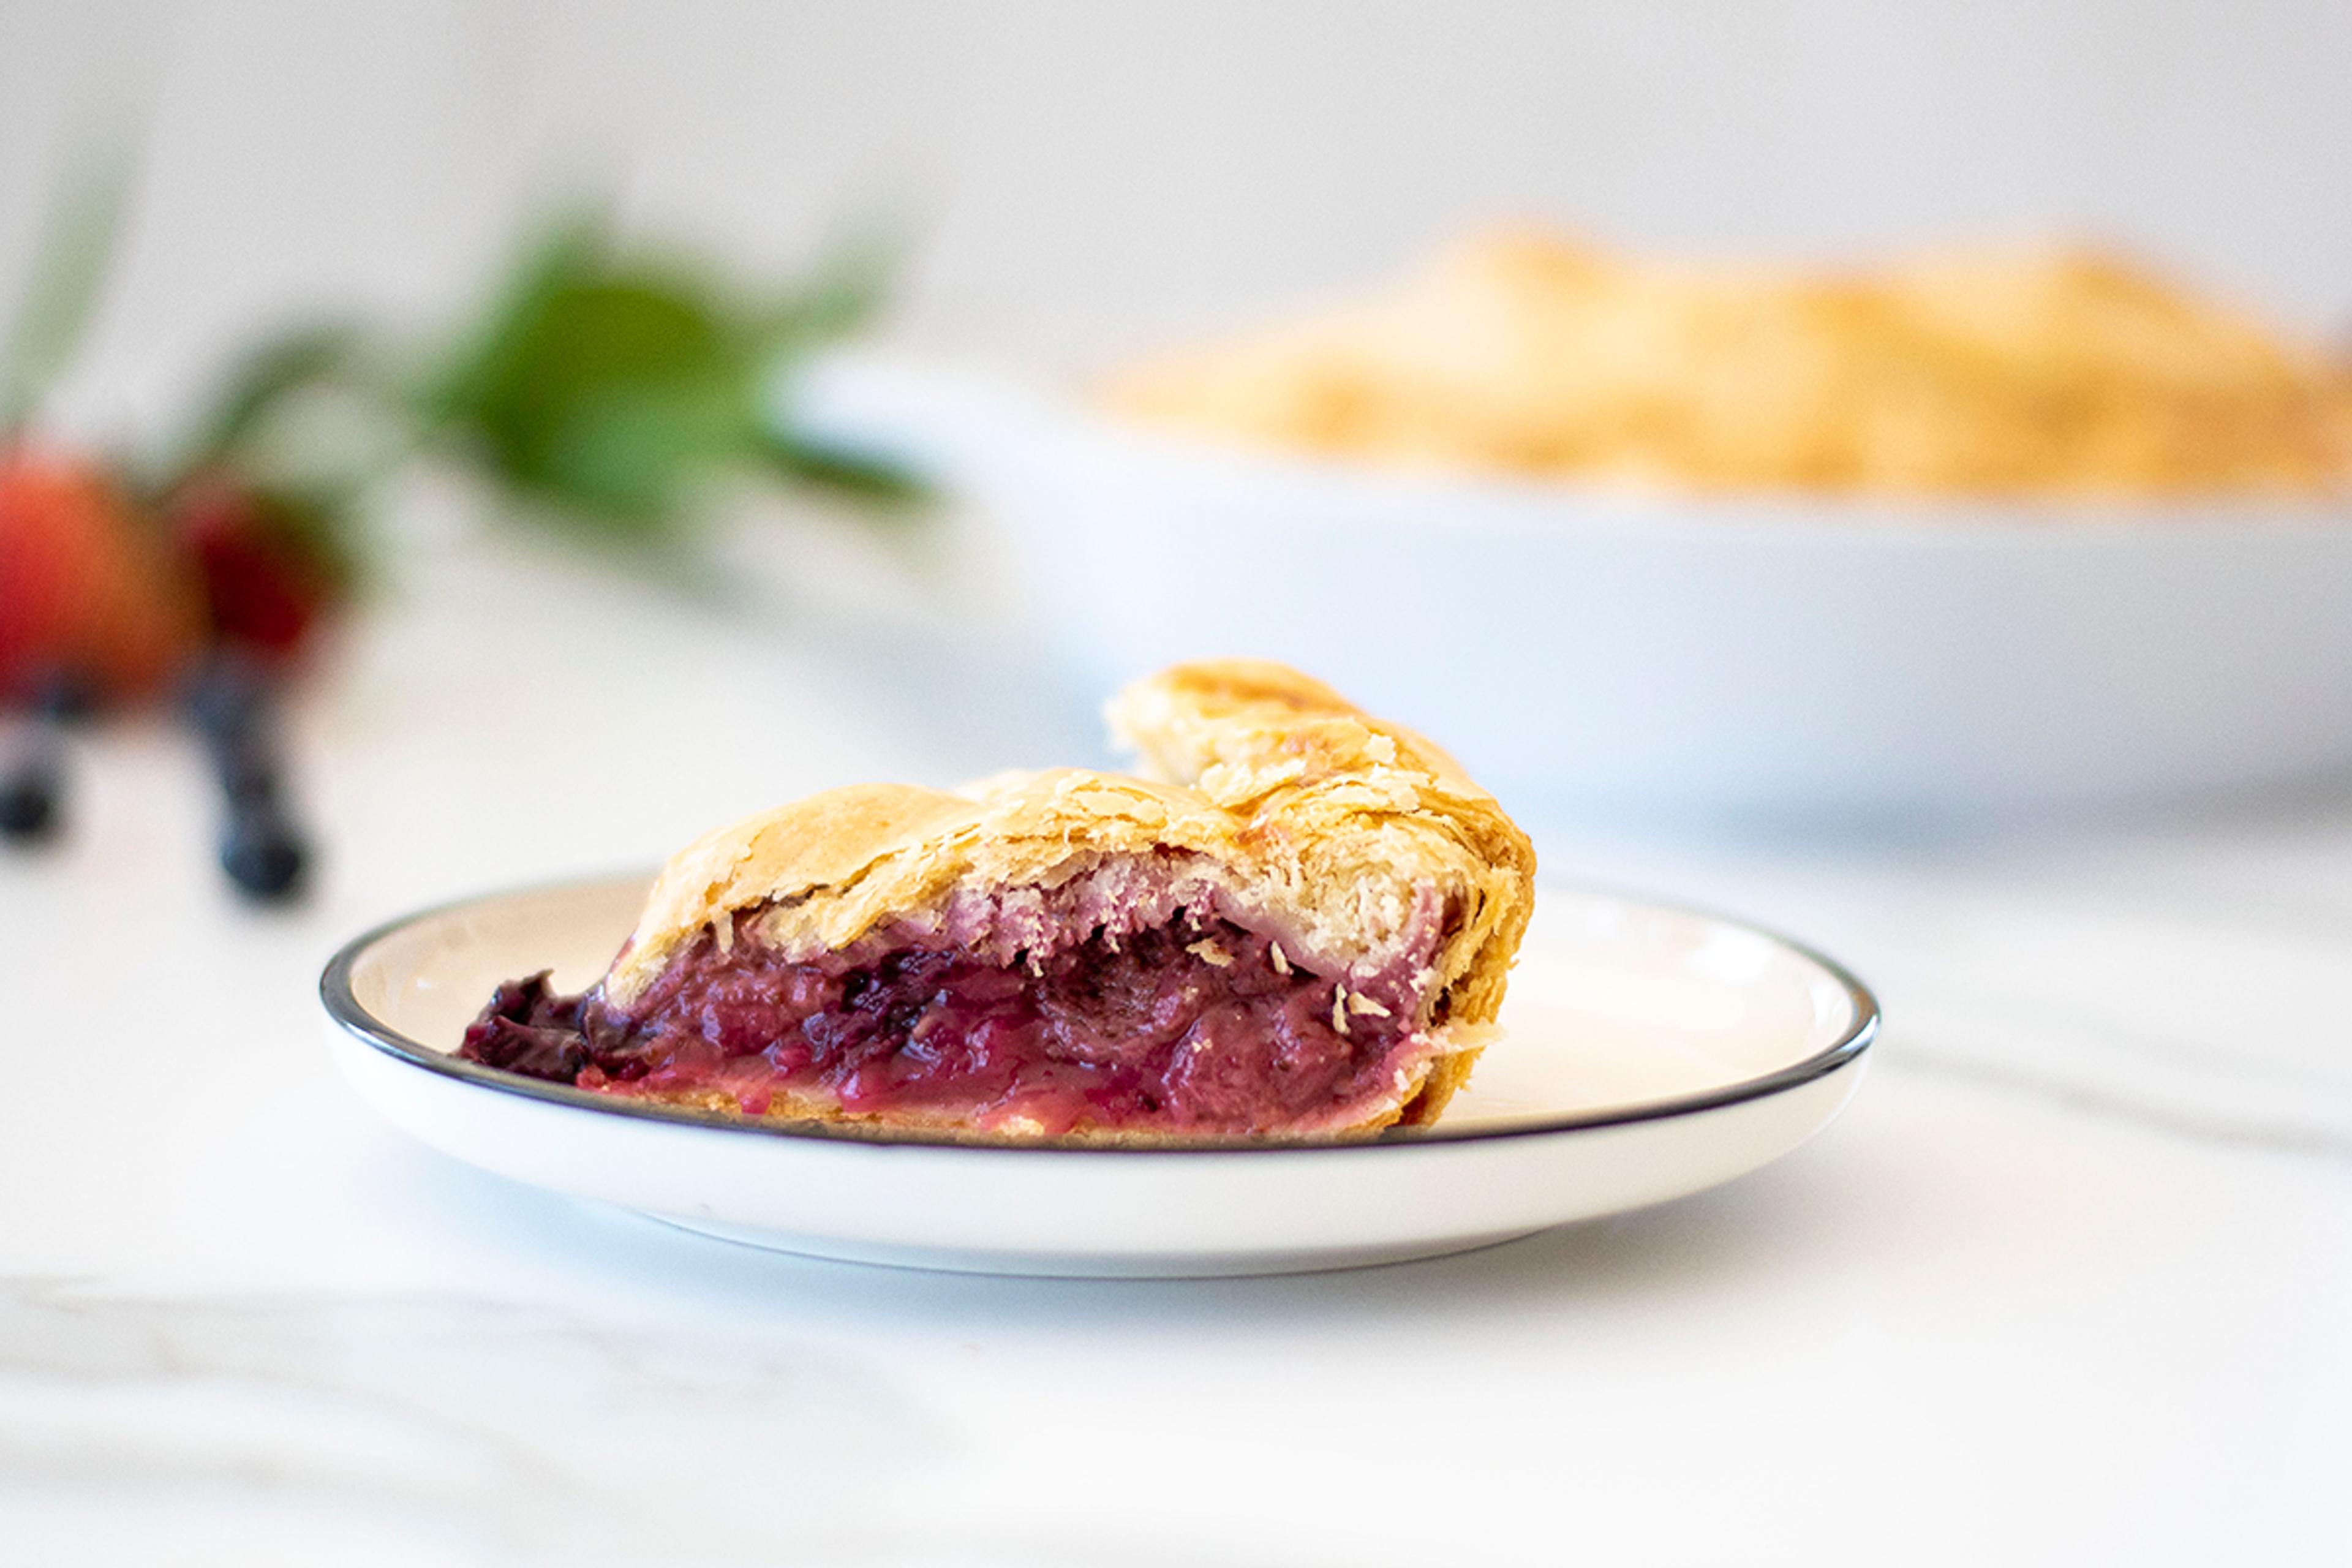 Slice of triple berry pie served and ready to eat.